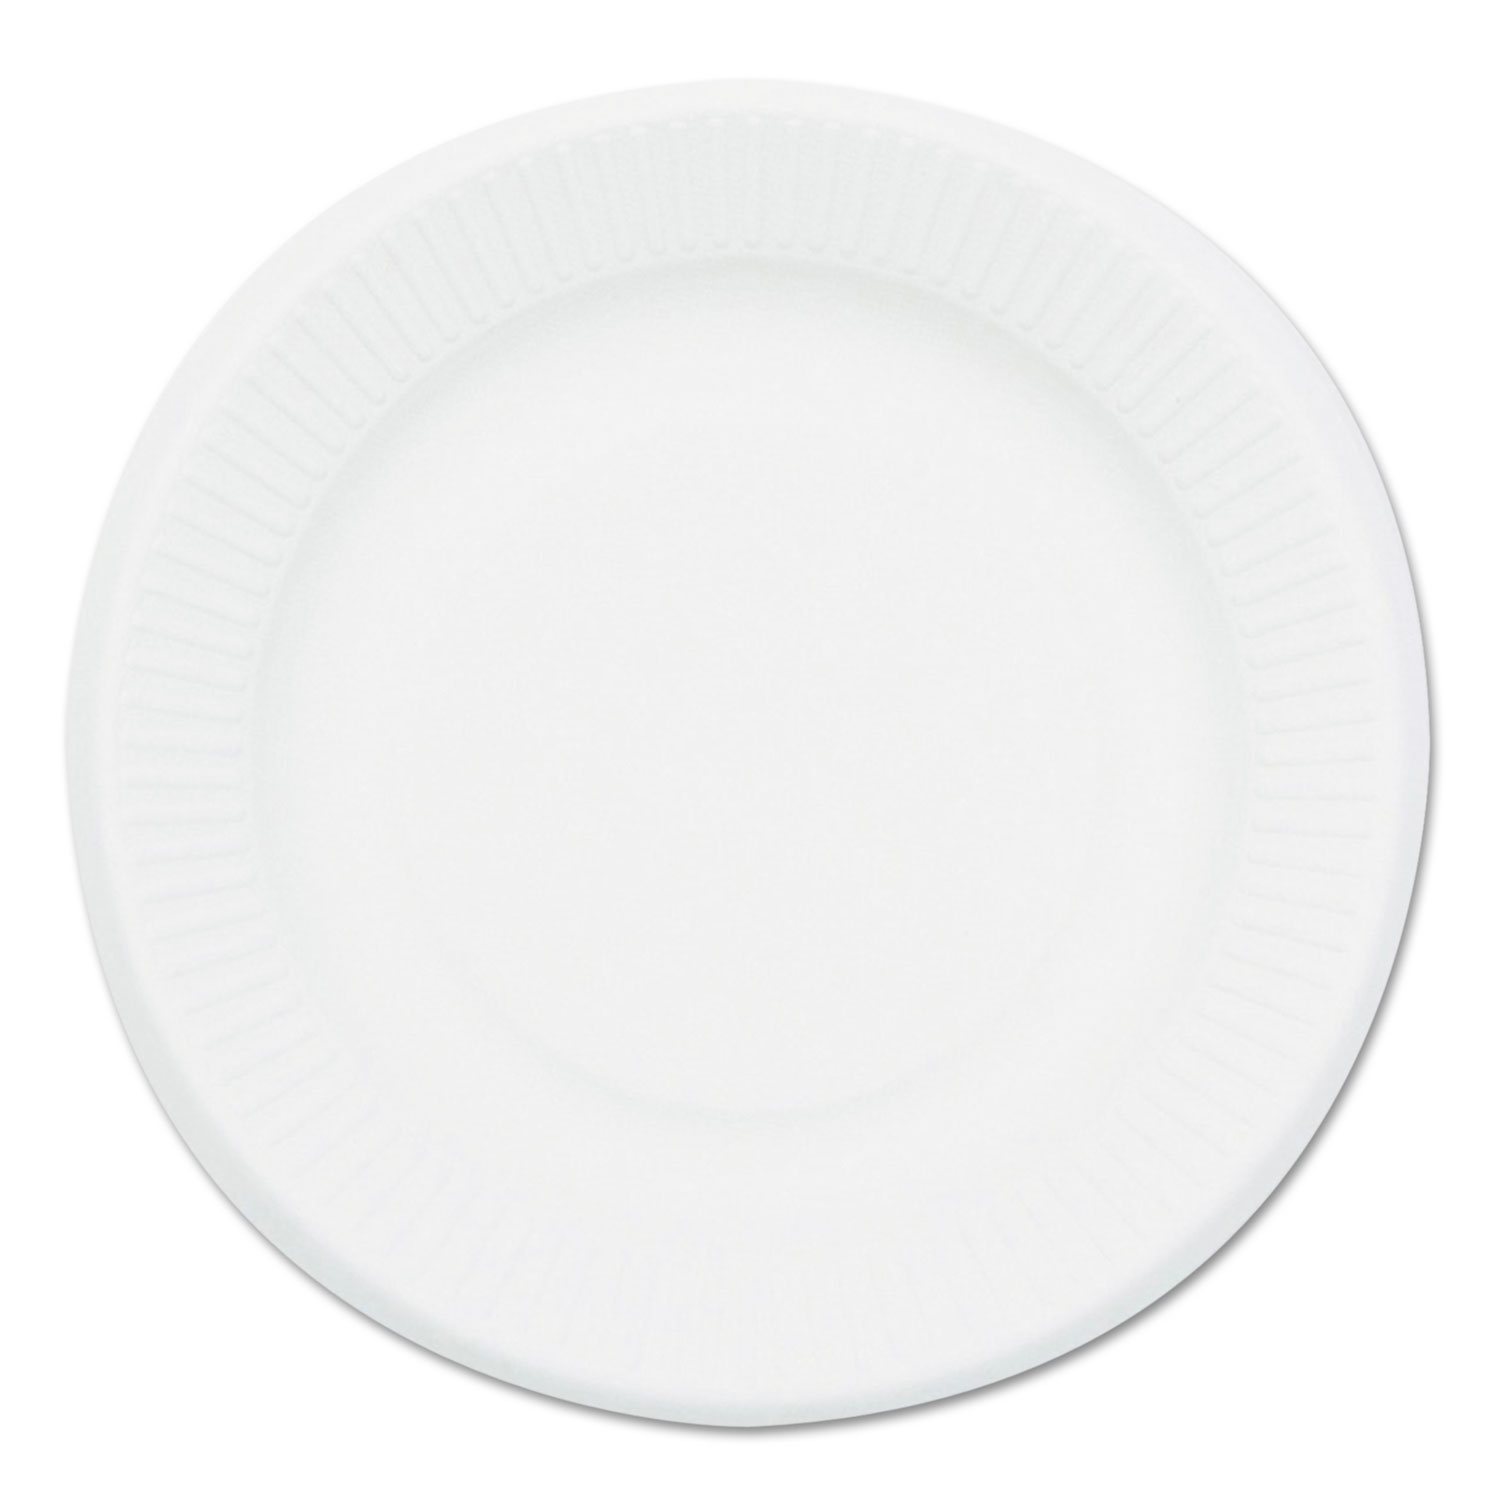 Savannah Supplies Inc. SVAP001 NatureHouse Compostable Sugarcane Bagasse 6 in Plate, Round, White, 50/Pack